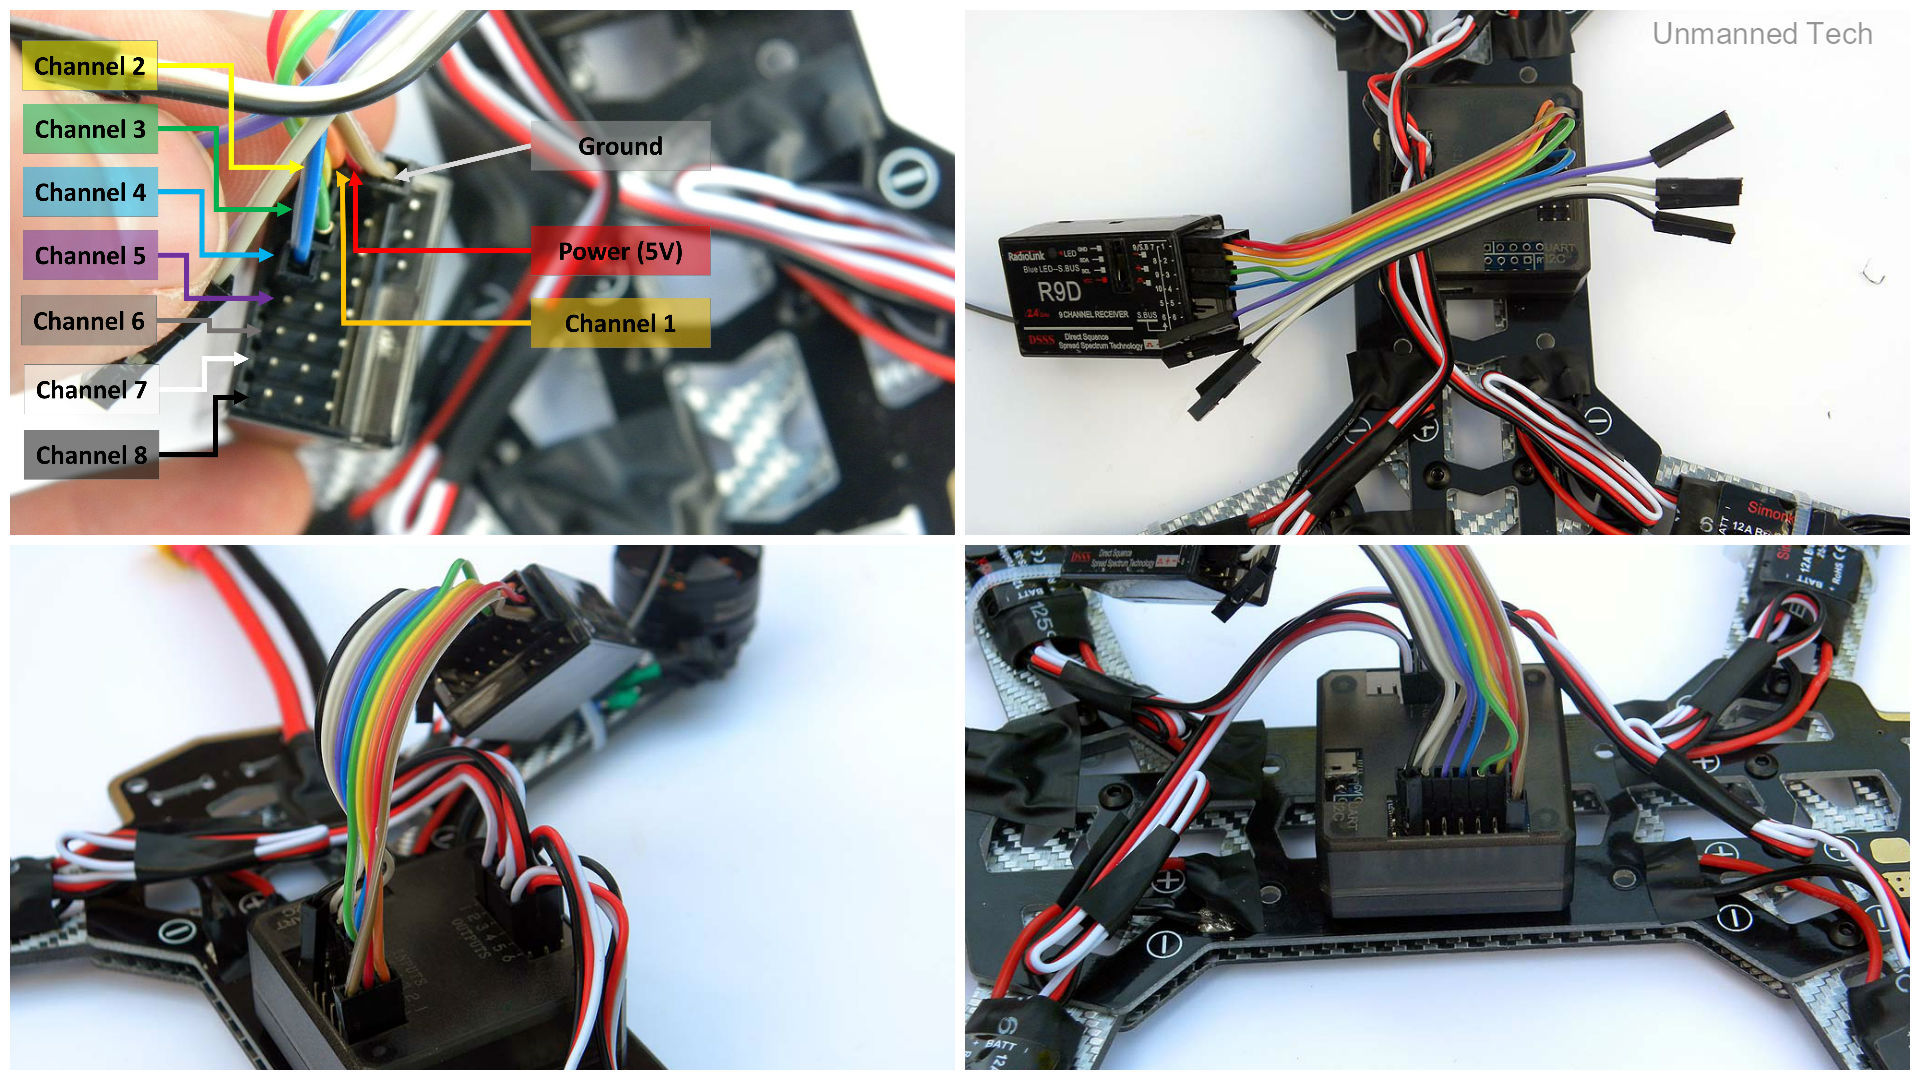 Beginners guide on how to build a mini FPV 250 quadcopter using the